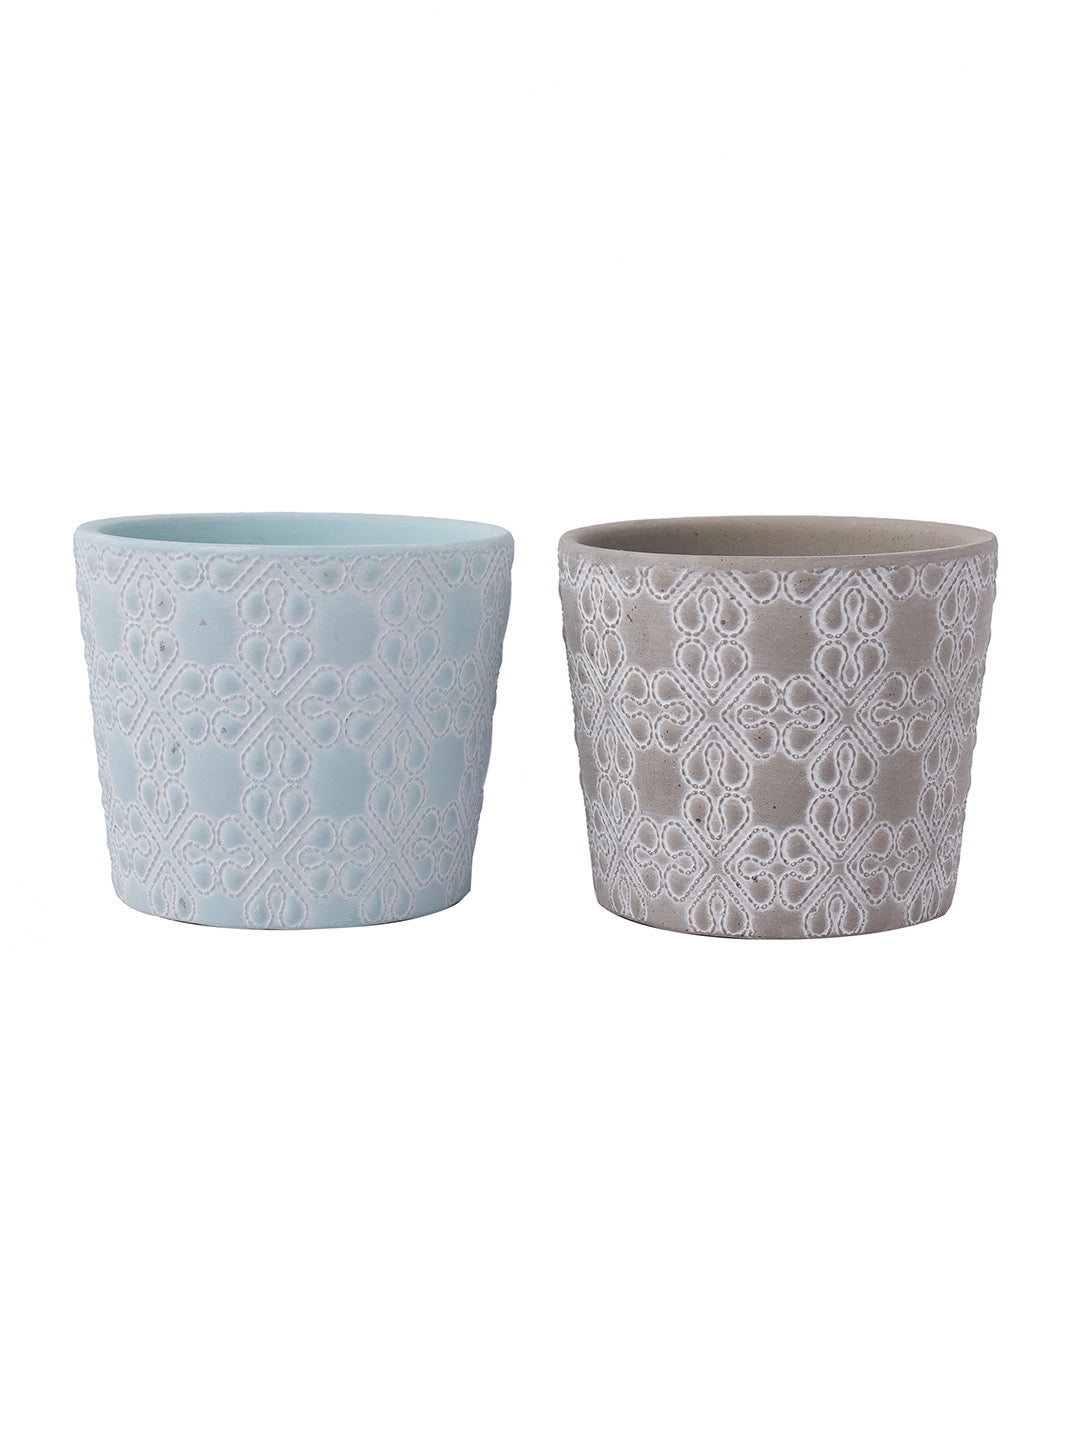 Two Blue and Grey Flower design Planters - Default Title (CH210077_2)